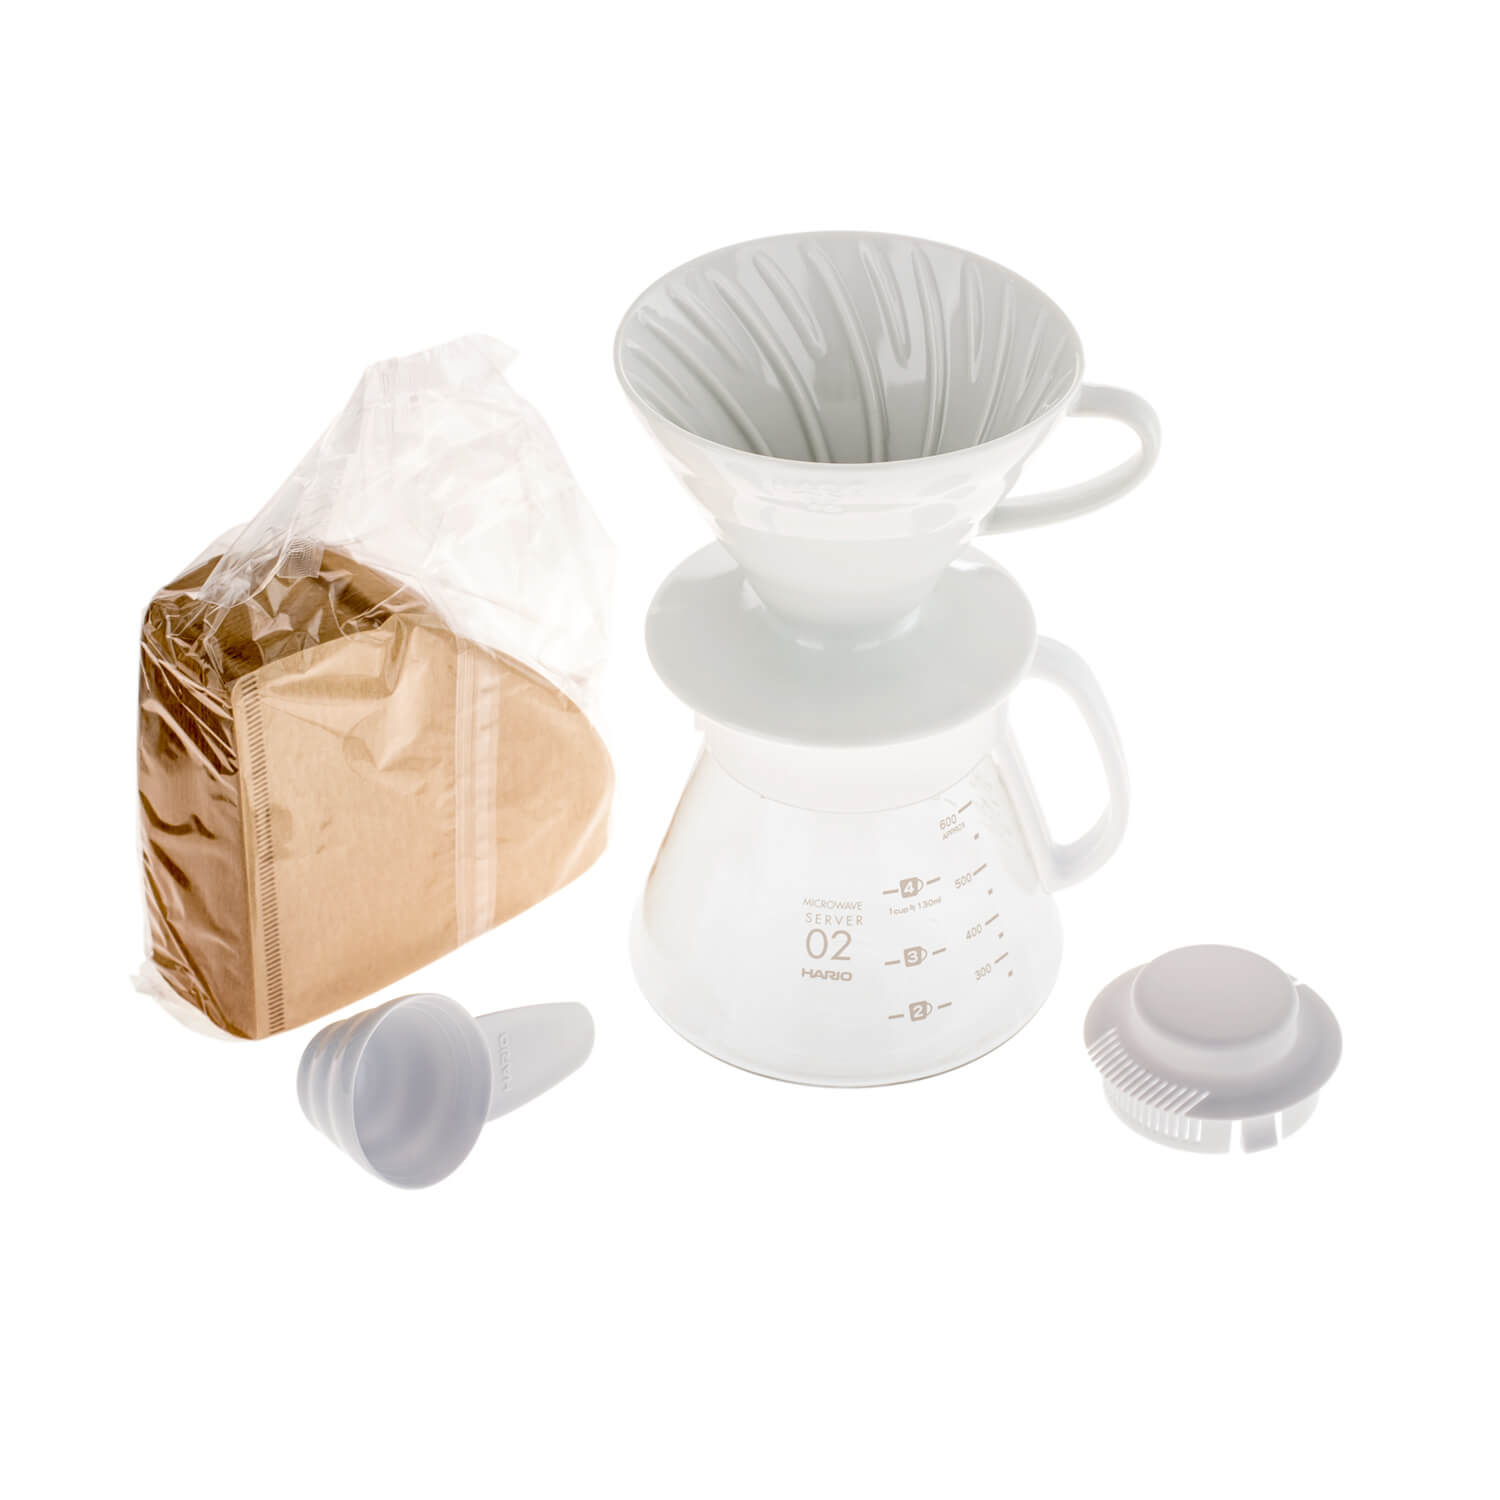 Hario Pour-over Craft Coffee Gift Box